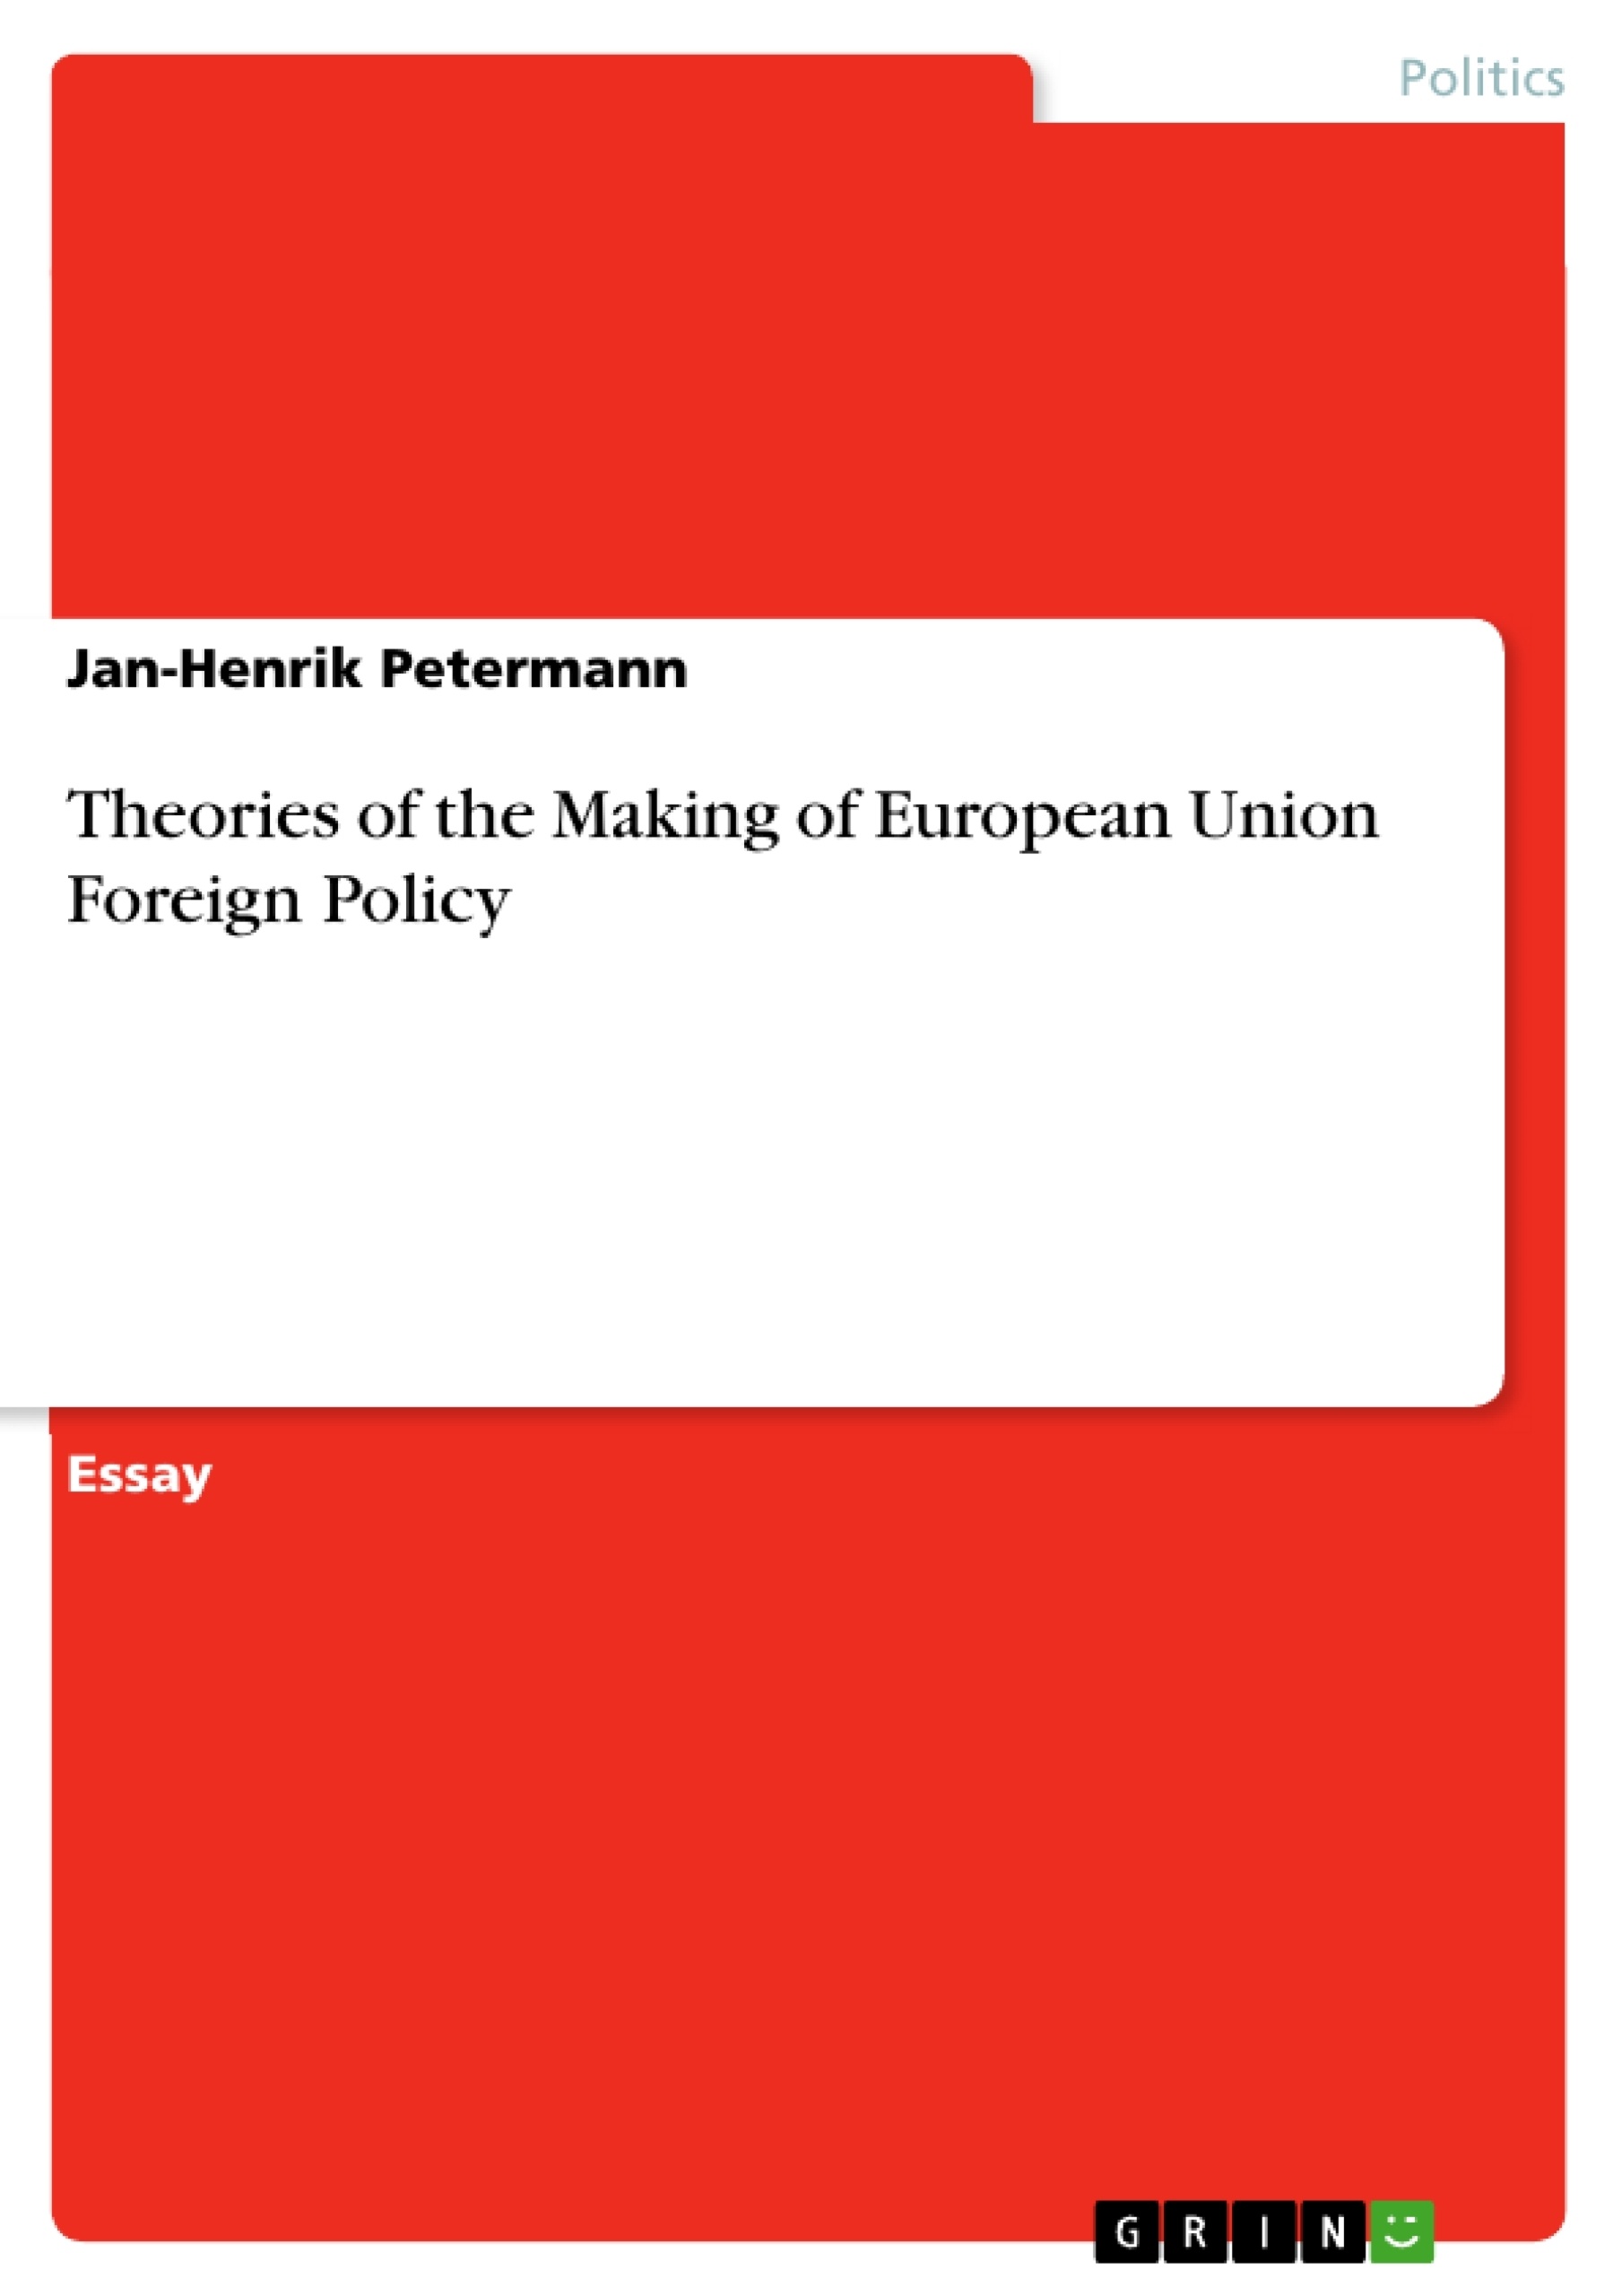 Title: Theories of the Making of European Union Foreign Policy